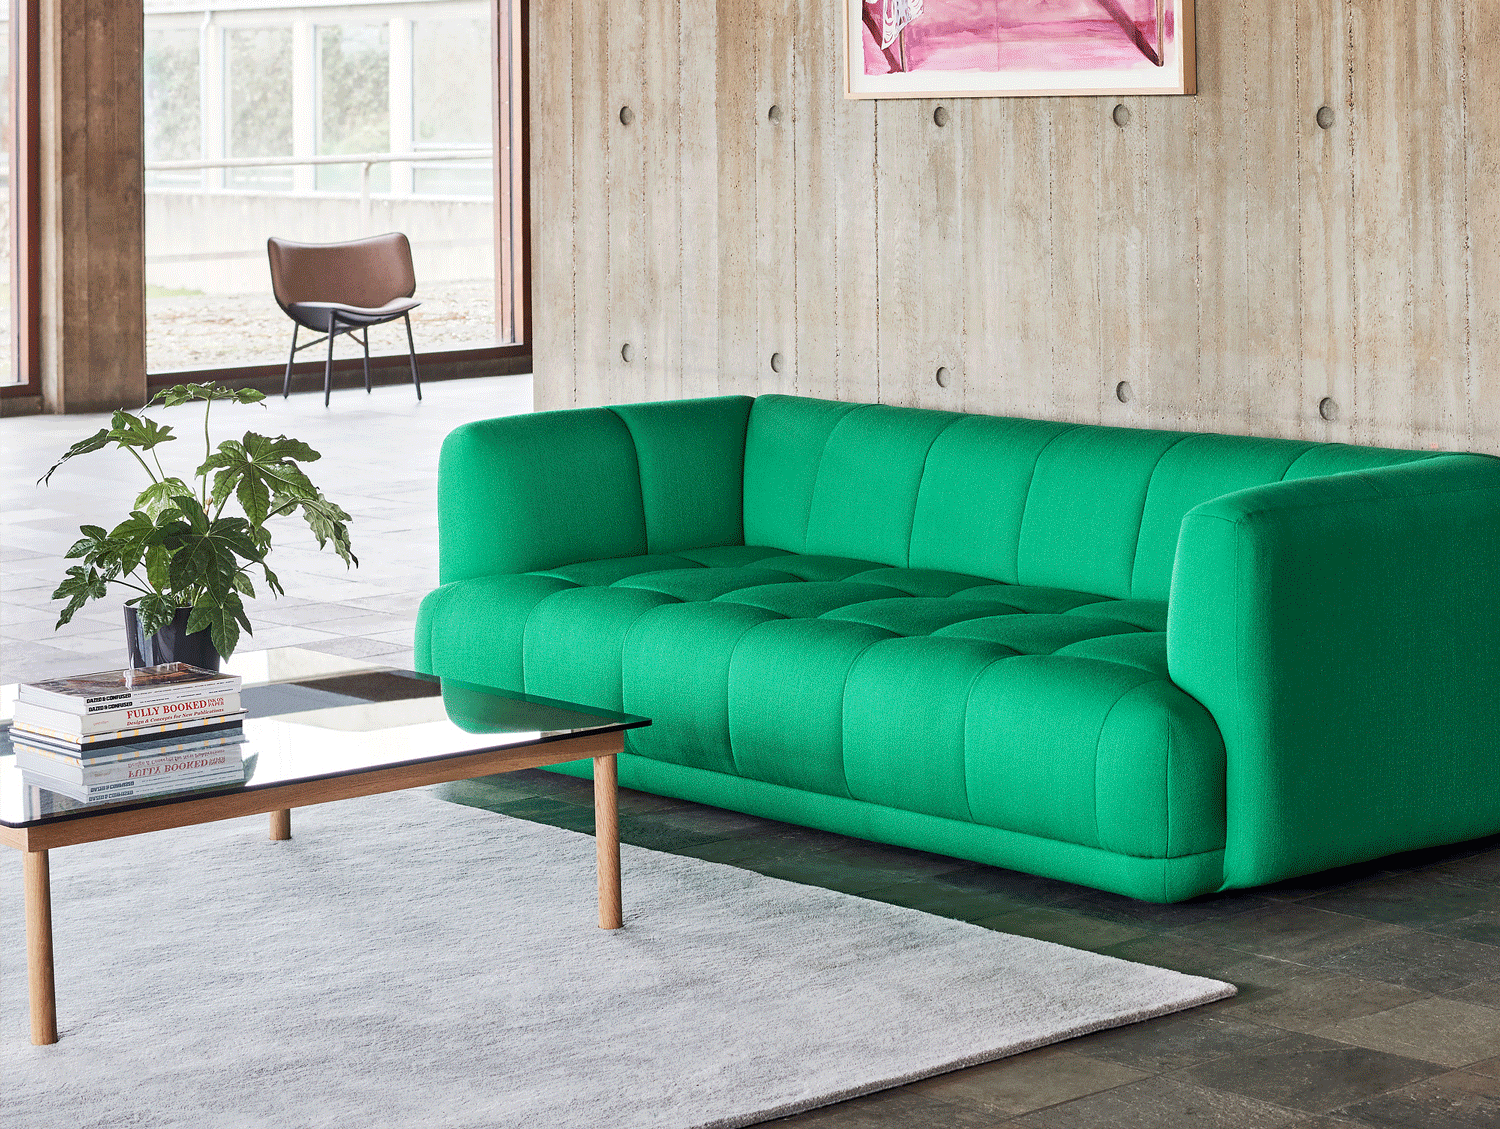 Quilton Sofa for HAY by Doshi Levien